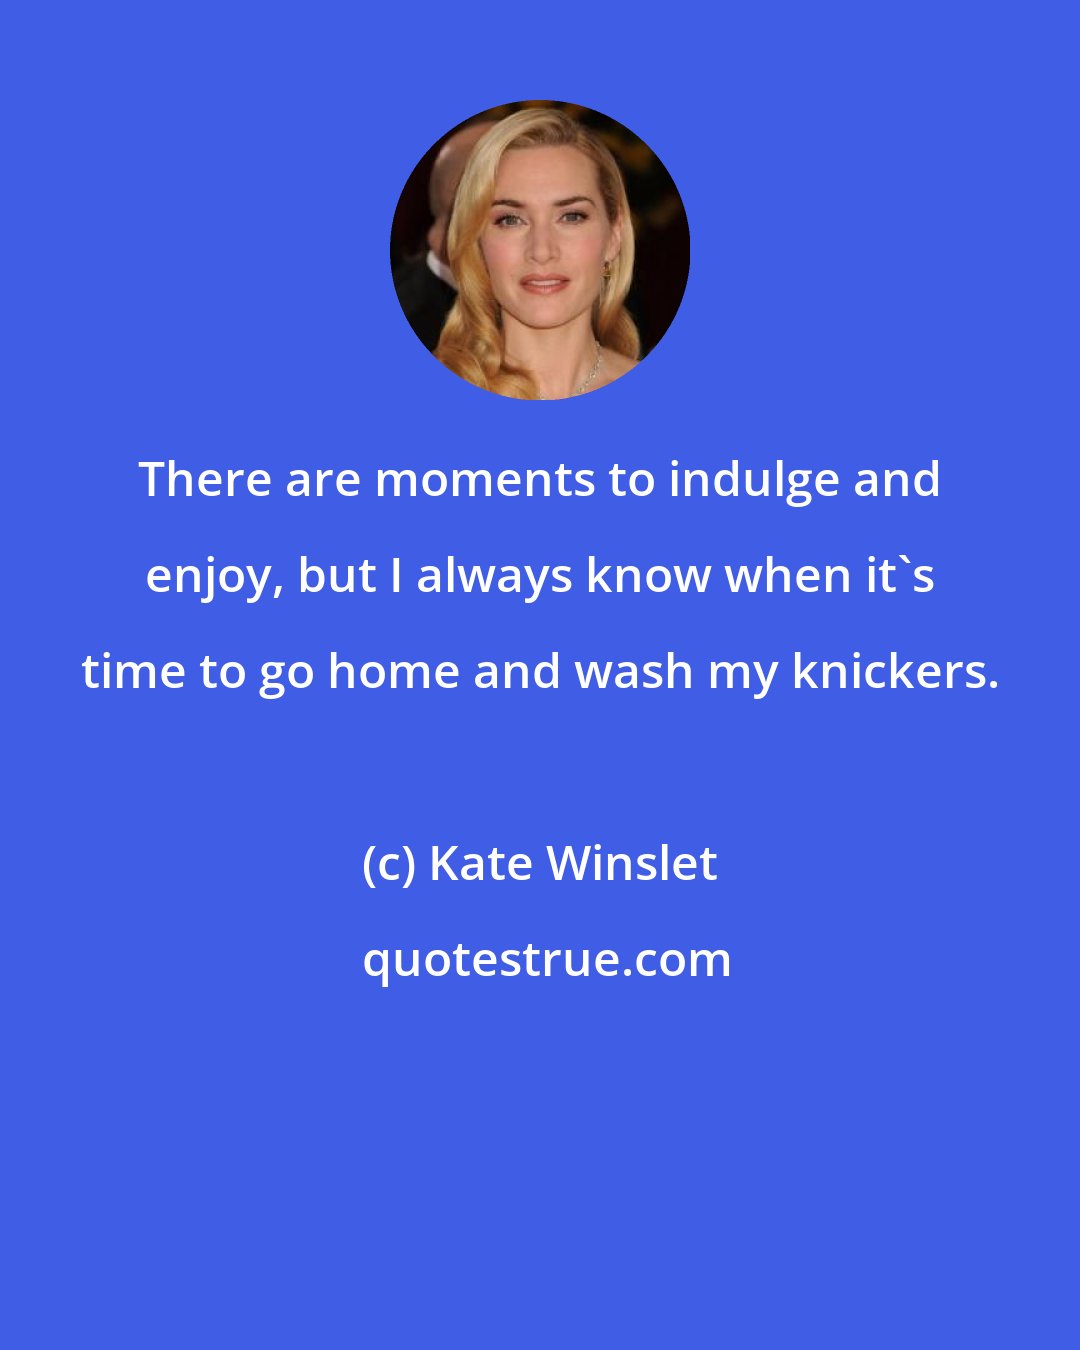 Kate Winslet: There are moments to indulge and enjoy, but I always know when it's time to go home and wash my knickers.